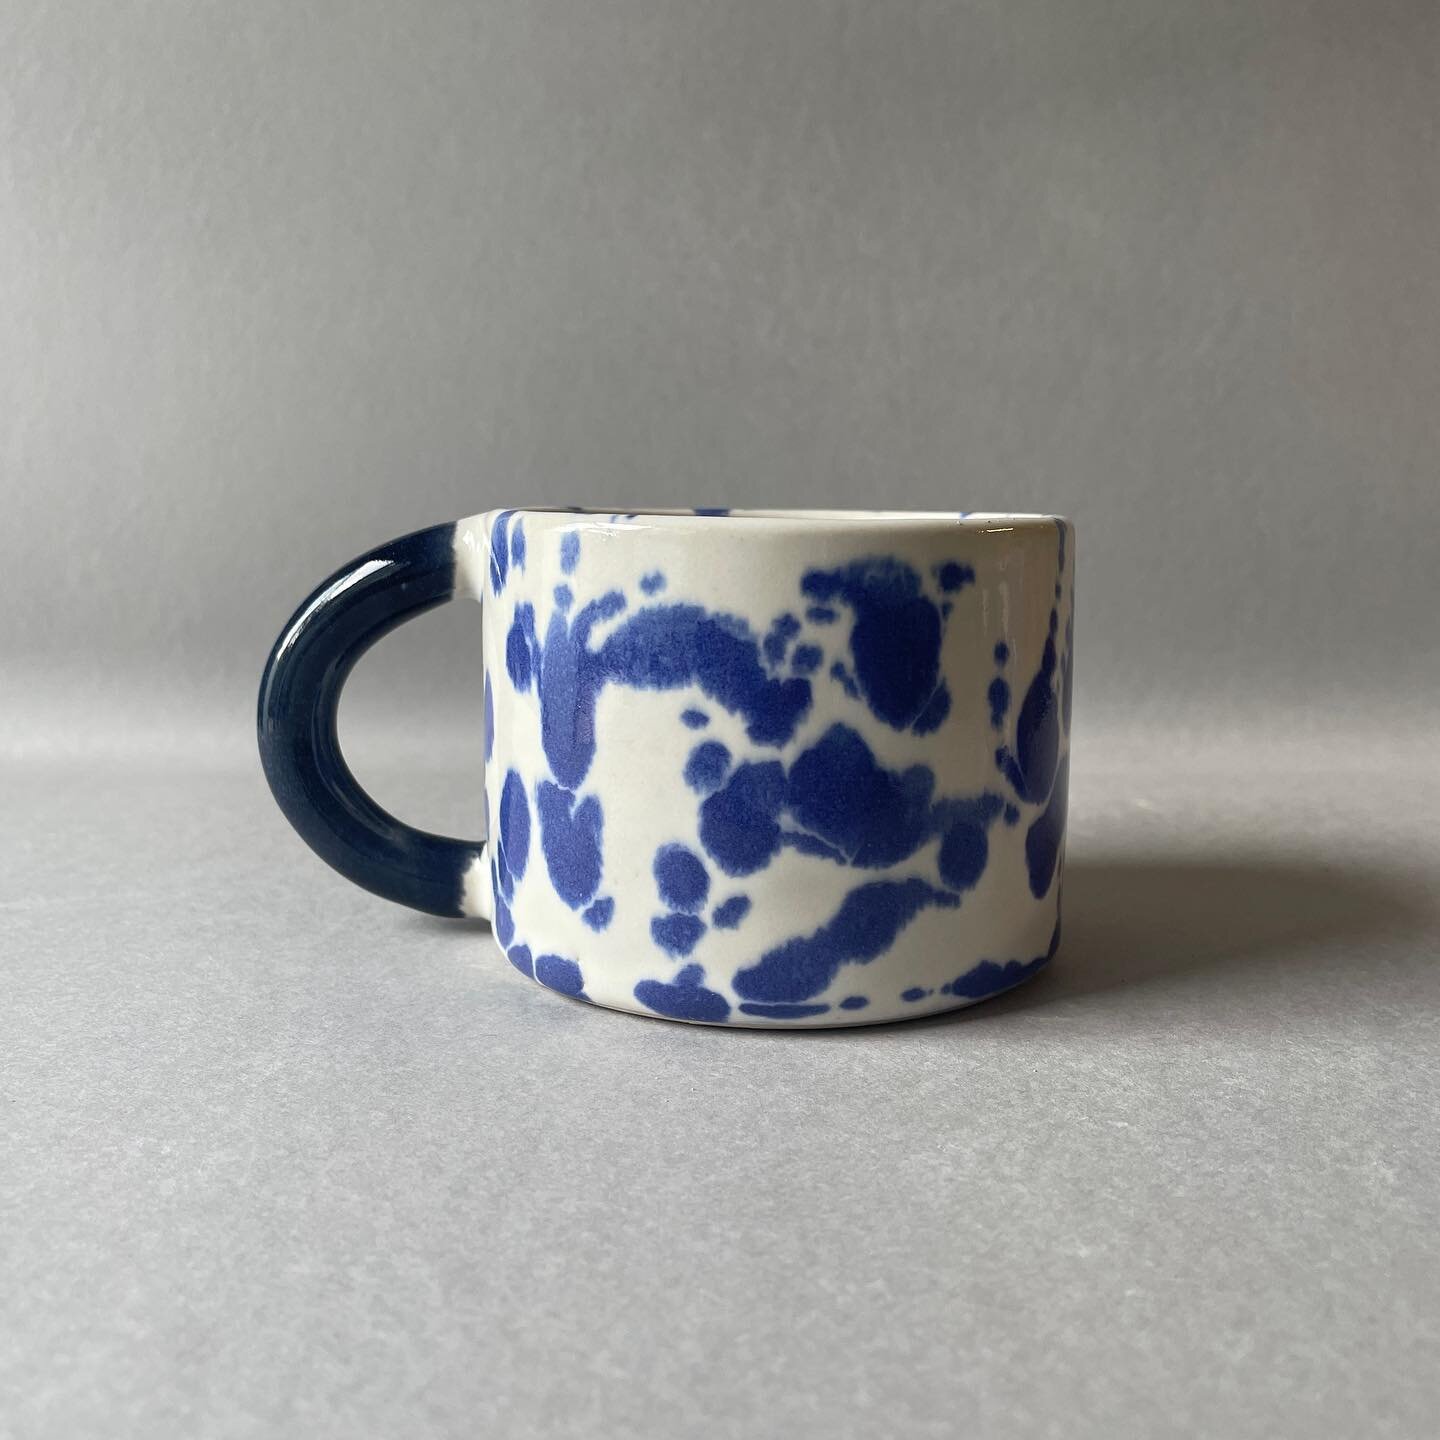 Feeling bloooovy. A mug I made for the amazing @ihavethisthingwithceramics and @dowsedesign to celebrate their 10th birthday 🥳 🎂 🎉
.
.
.
#ihavethisthingwithceramics #dowsedesign #pottery #ceramic #ceramics #potterylove #ceramicdesign #ceramicist #